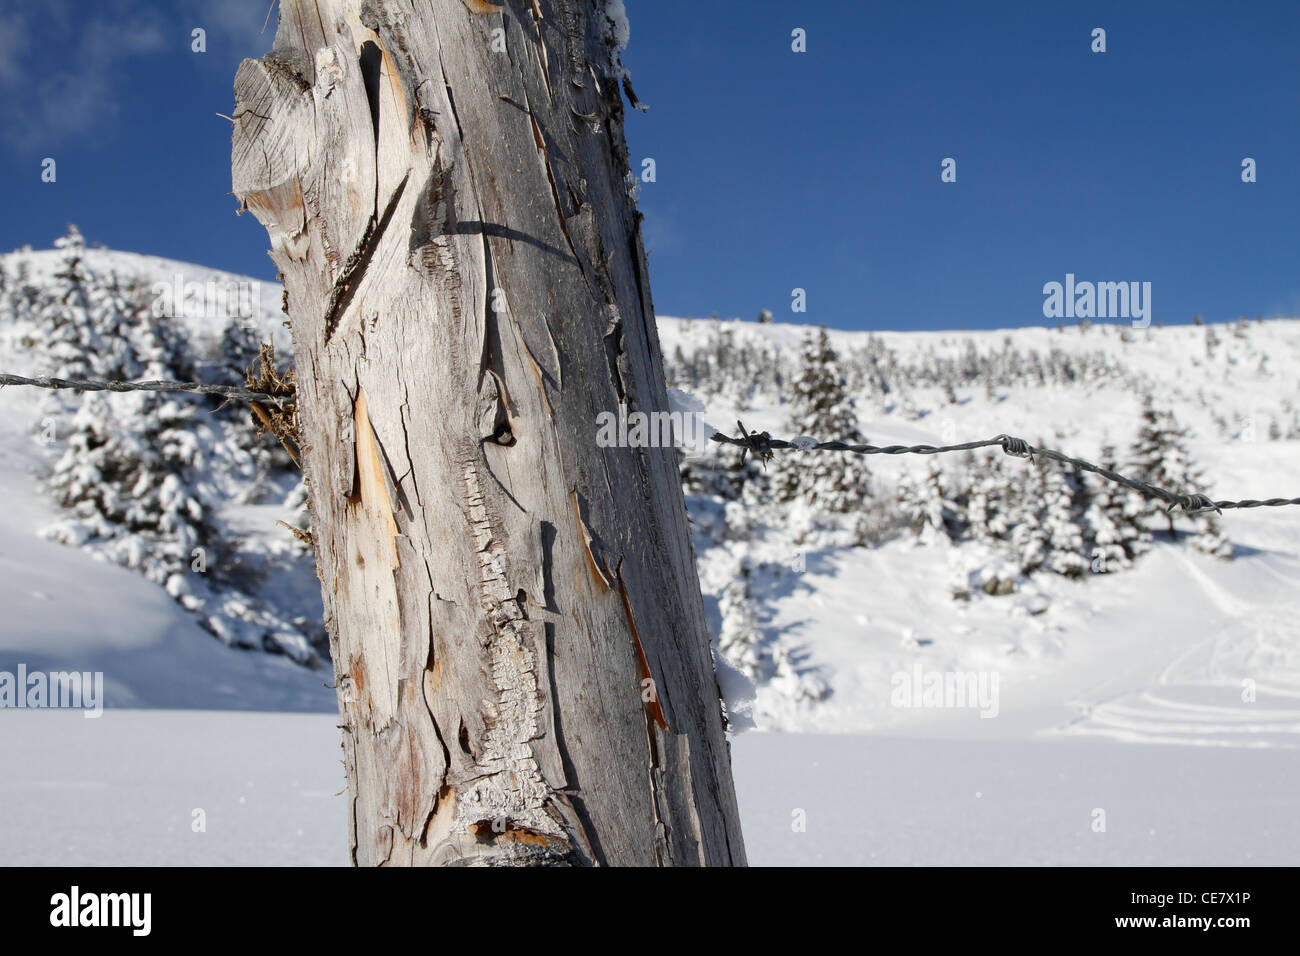 Tree trunk with barbed wire Stock Photo